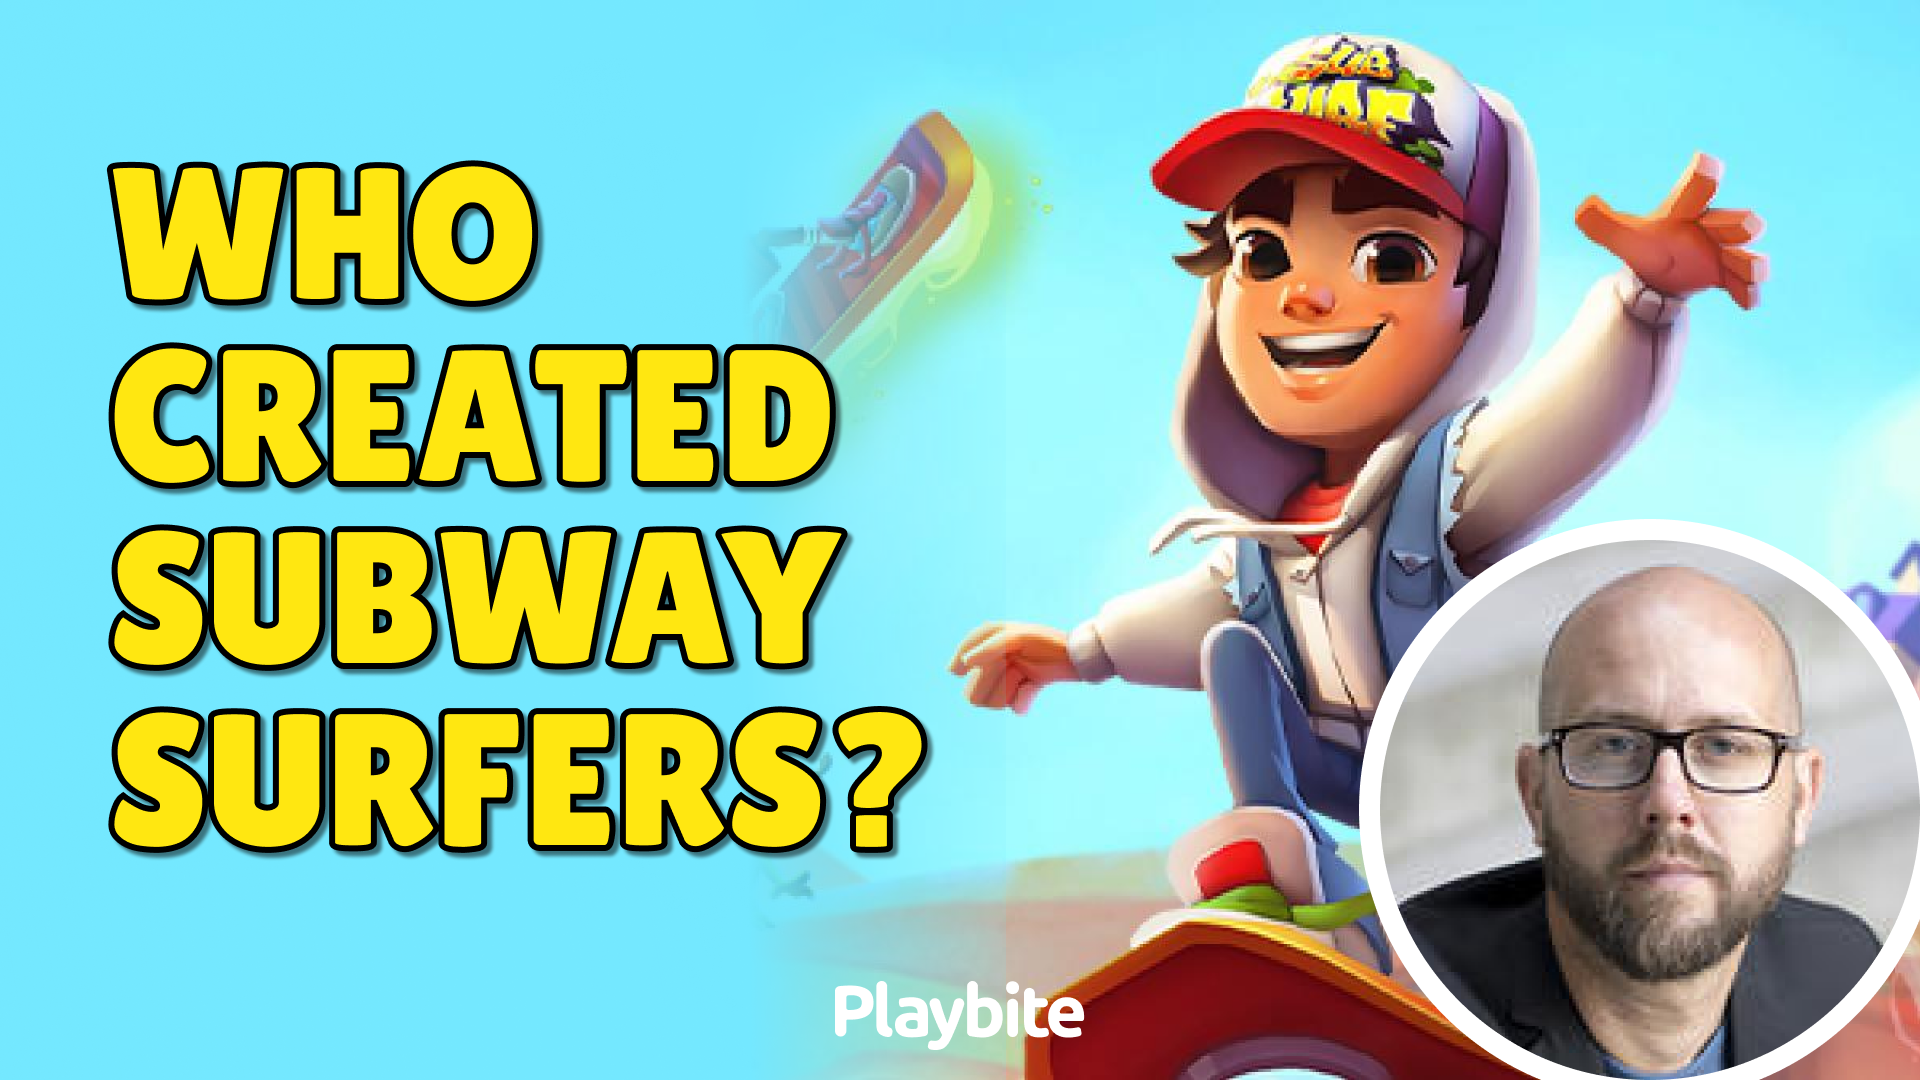 Who Created Subway Surfers?